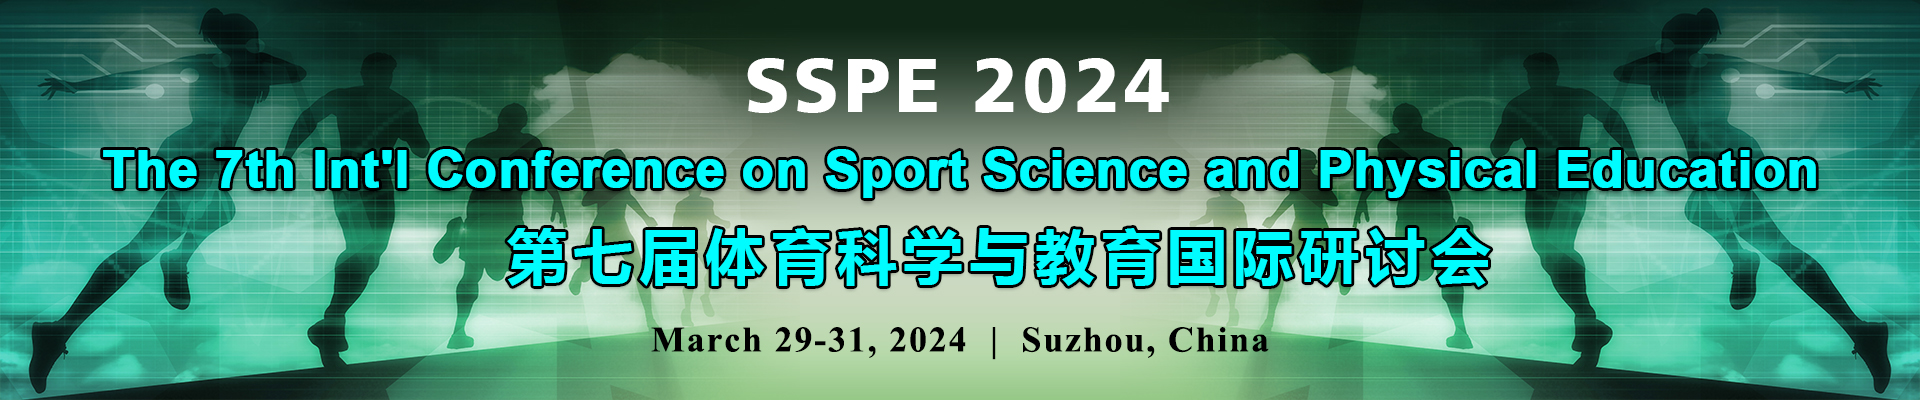 The 7th Int'l Conference on Sport Science and Physical Education (SSPE 2024), Suzhou, Jiangsu, China